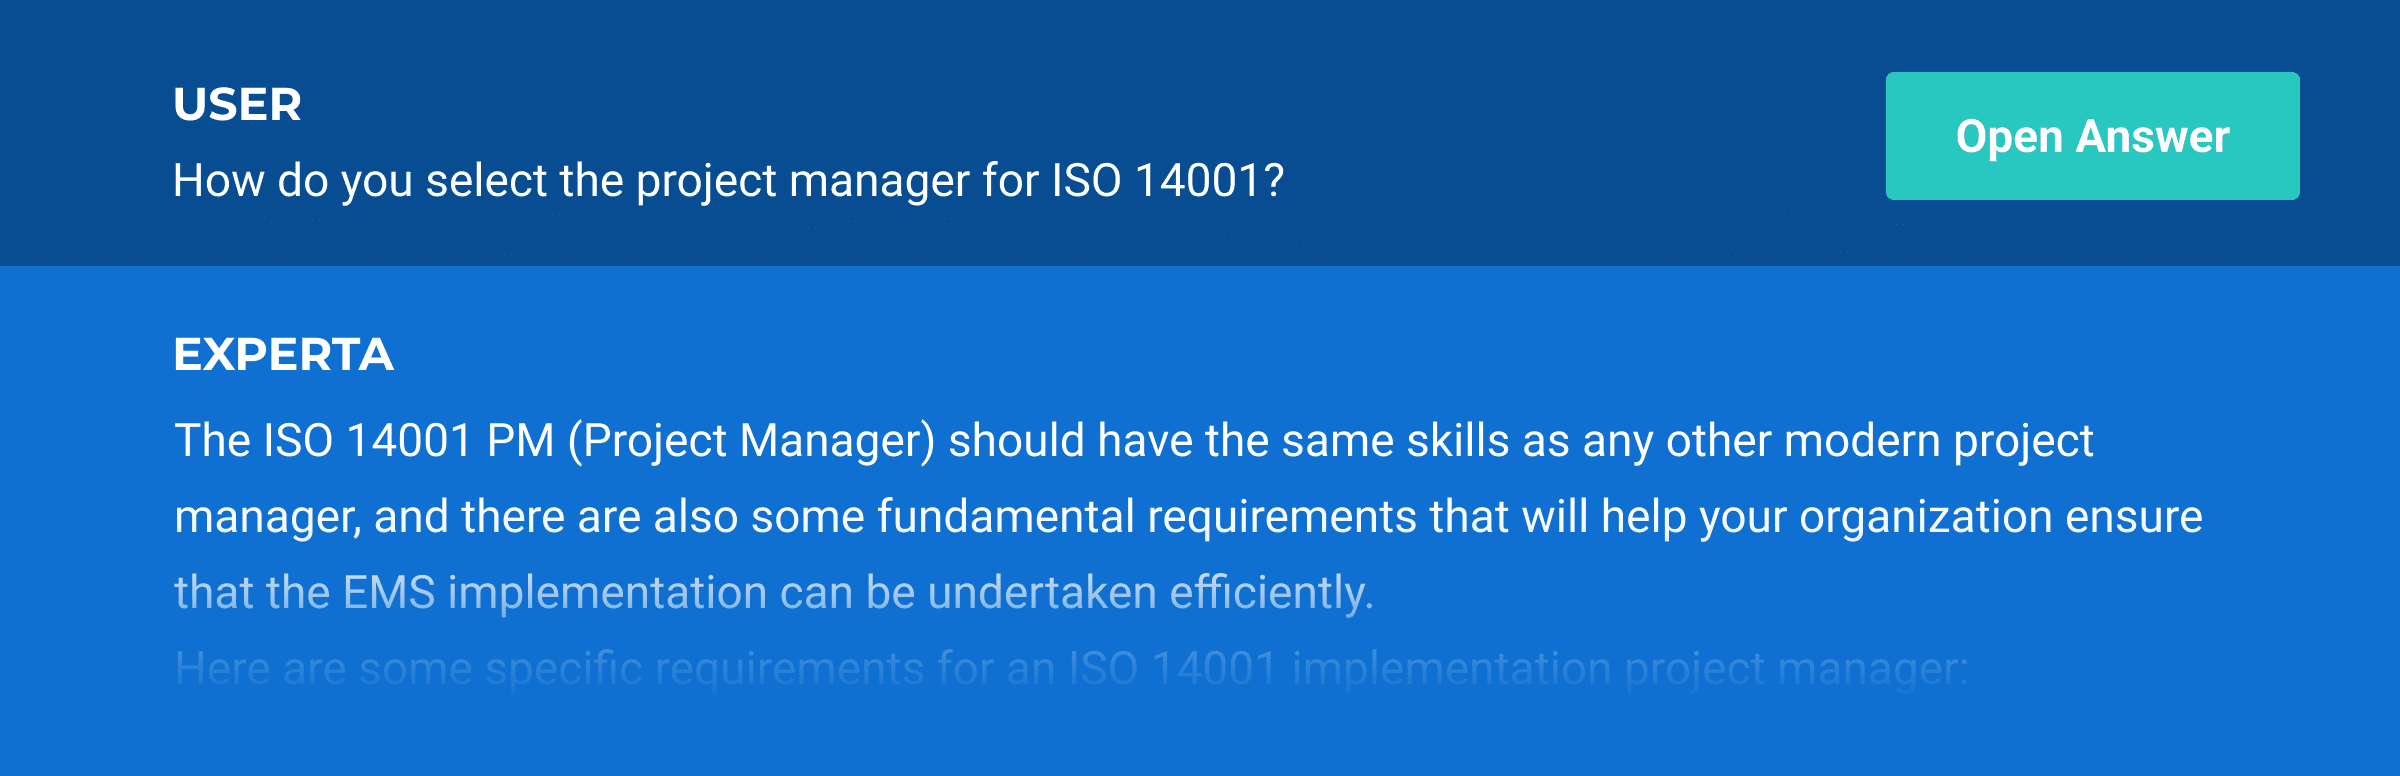 How to implement ISO 14001 using generative AI - Advisera